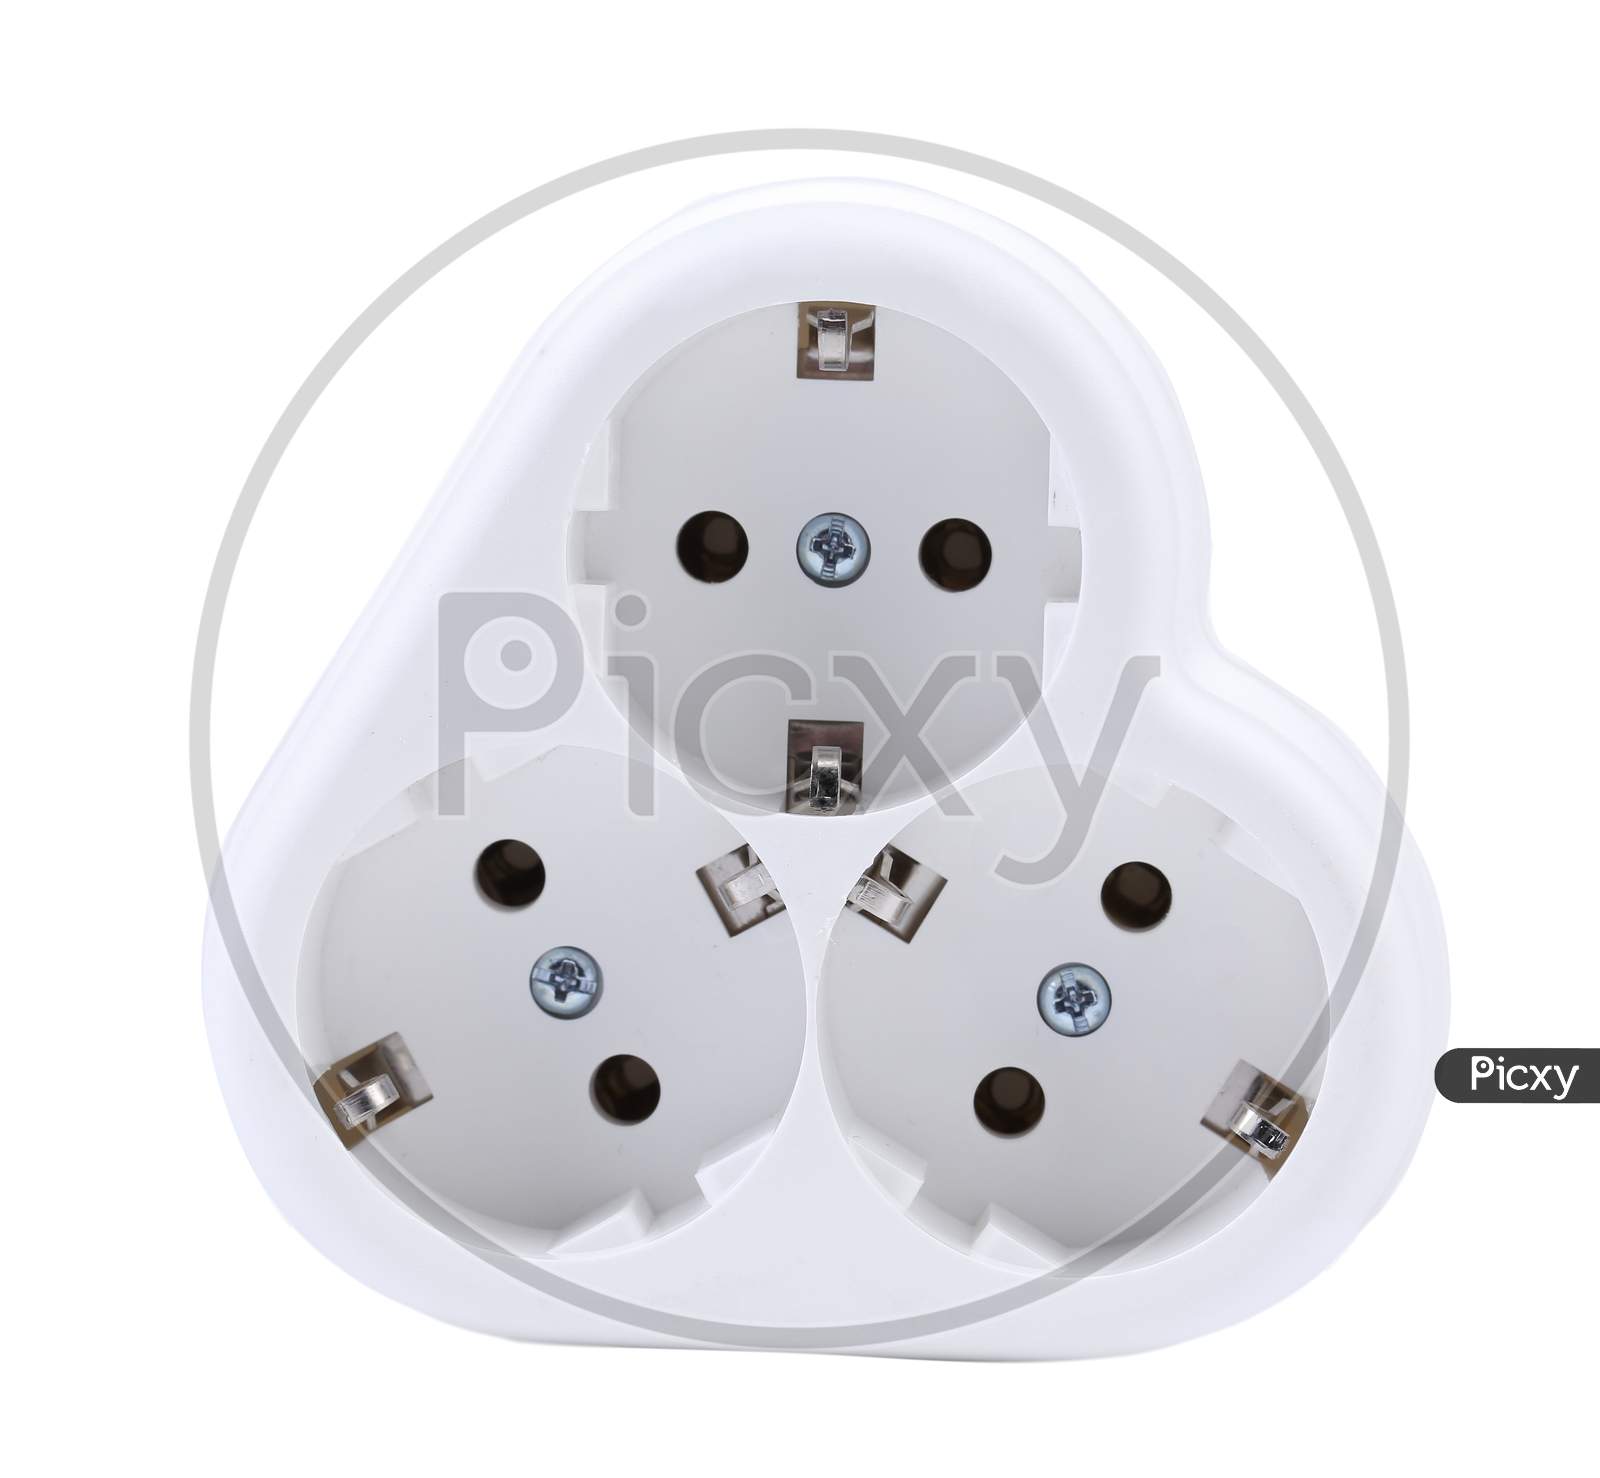 Contact Socket Splitter For Three Plugs. Isolated On A White Background.